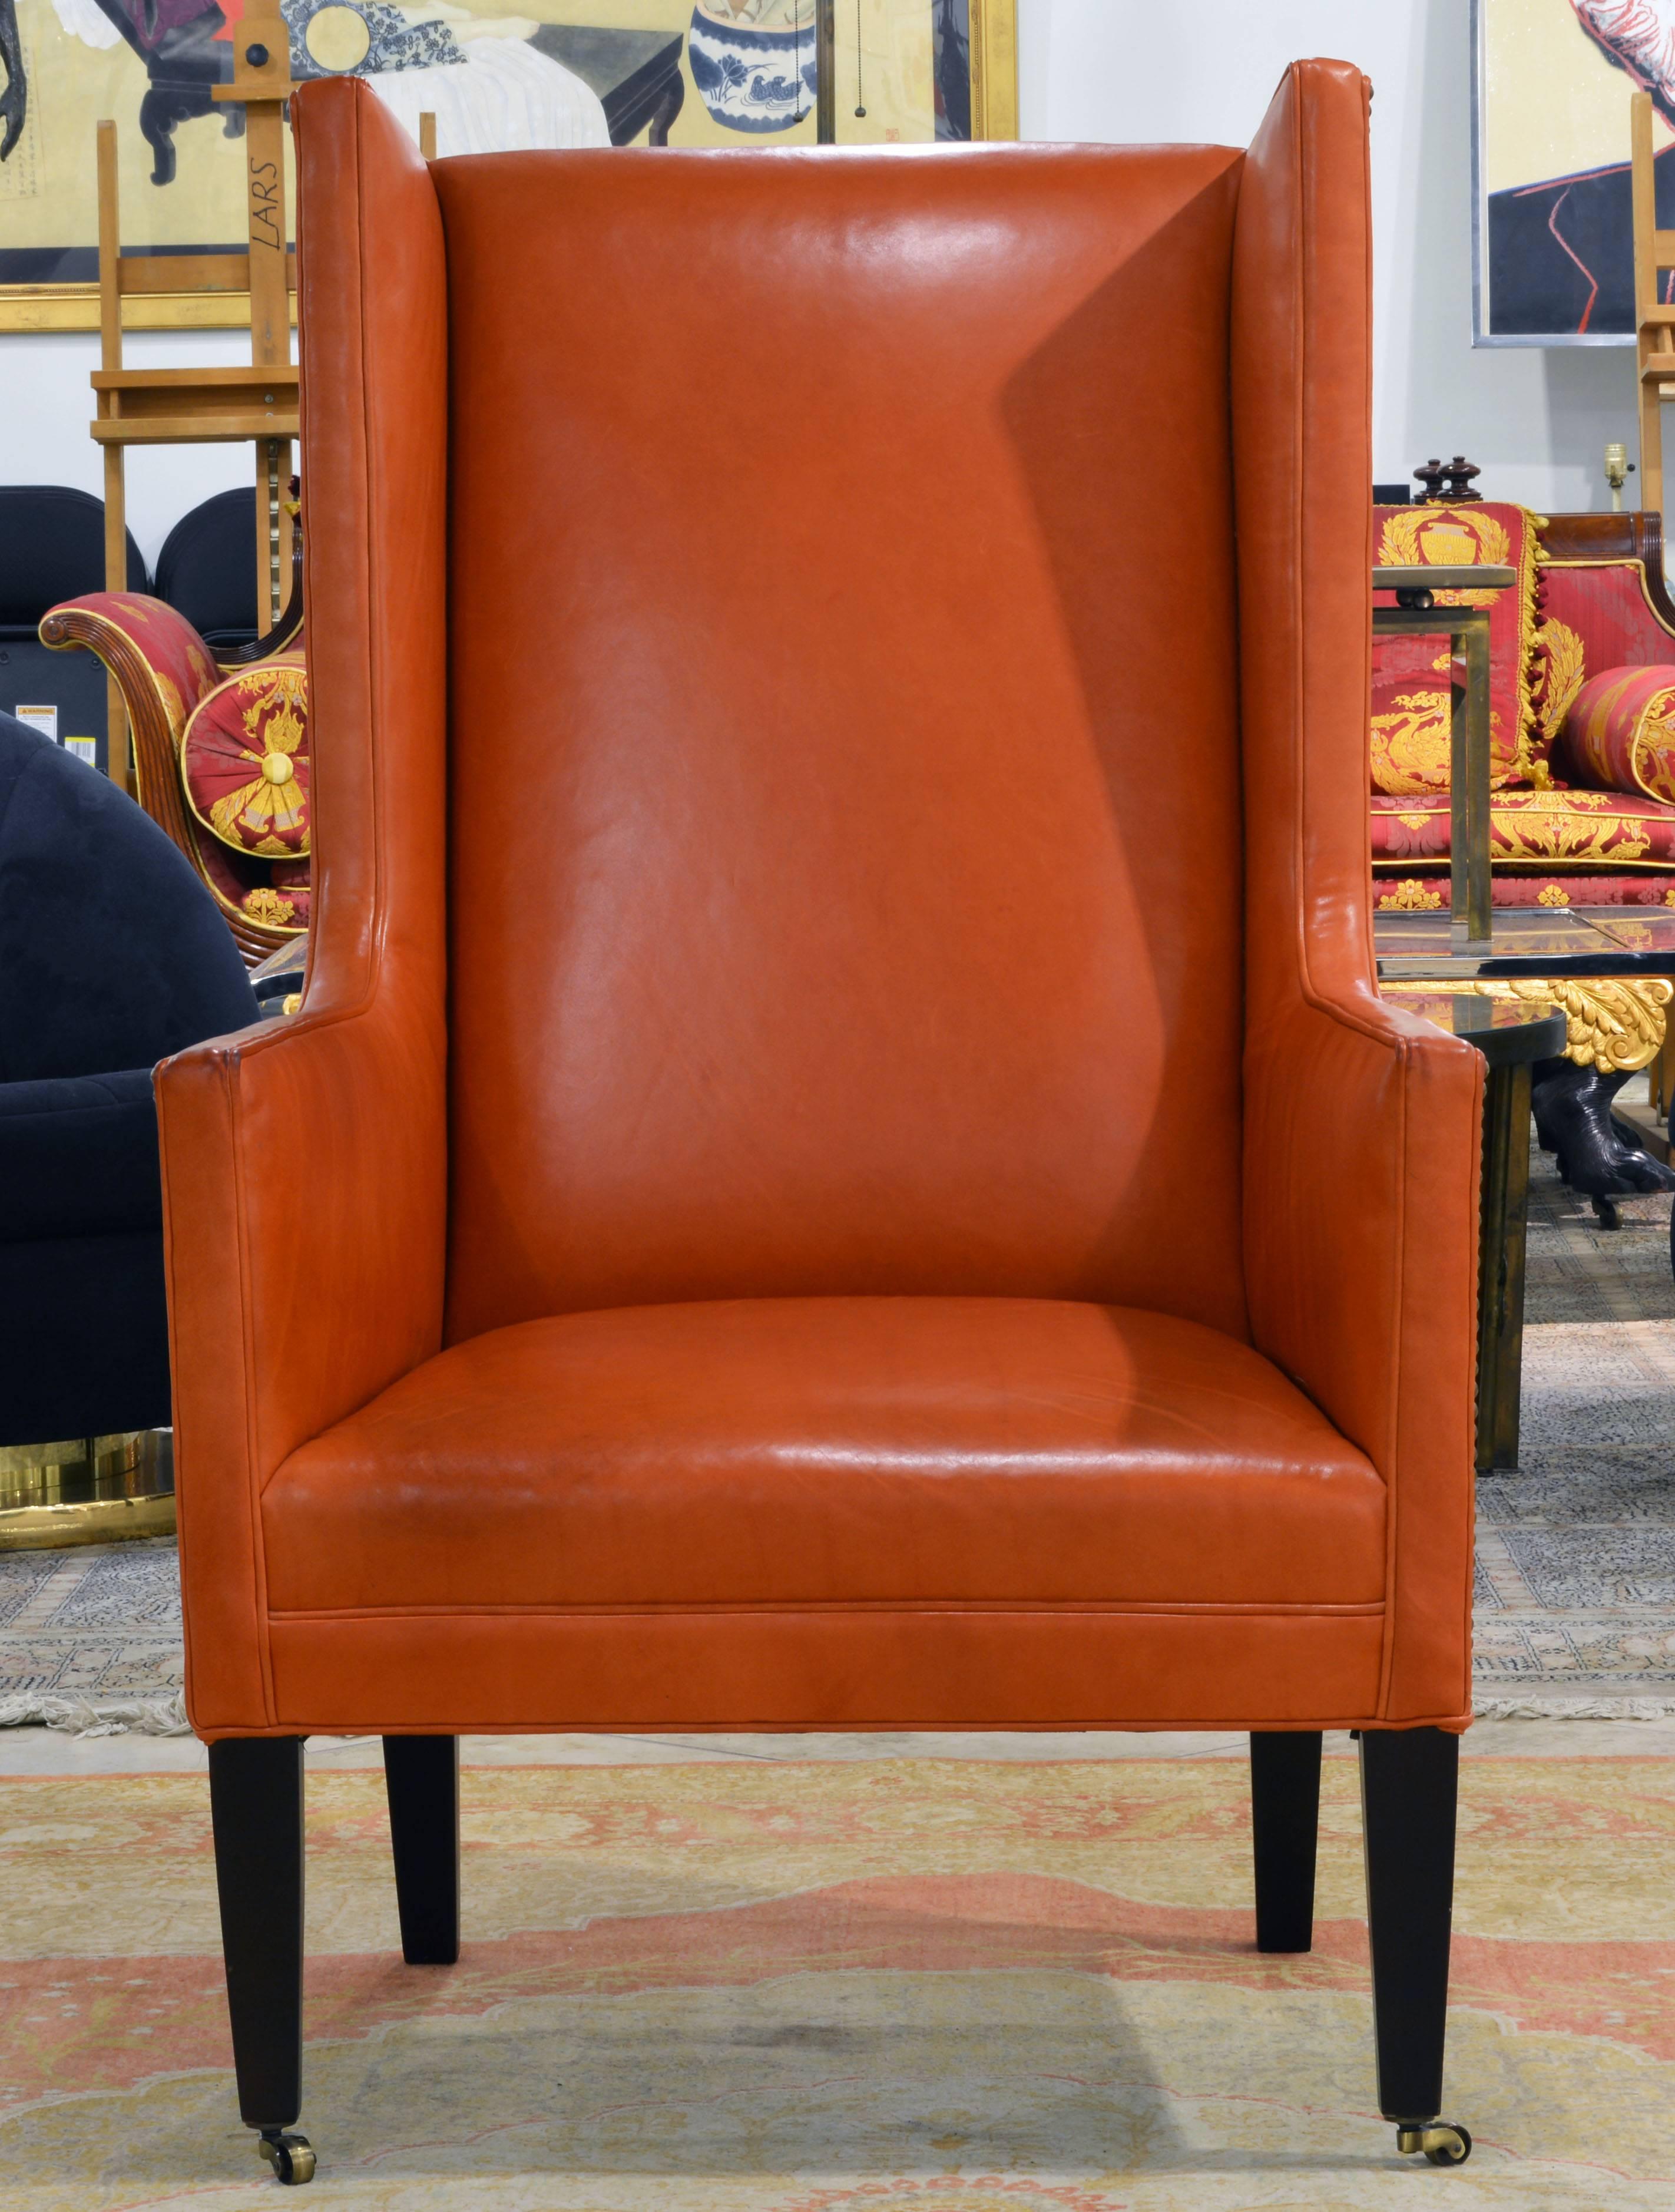 The Hermes orange color of the glove quality leather and the refined proportions and details make this chair stand out. The sides of the chair are accented by nail-head trim adding a Classic feel and the front legs rest on brass casters making